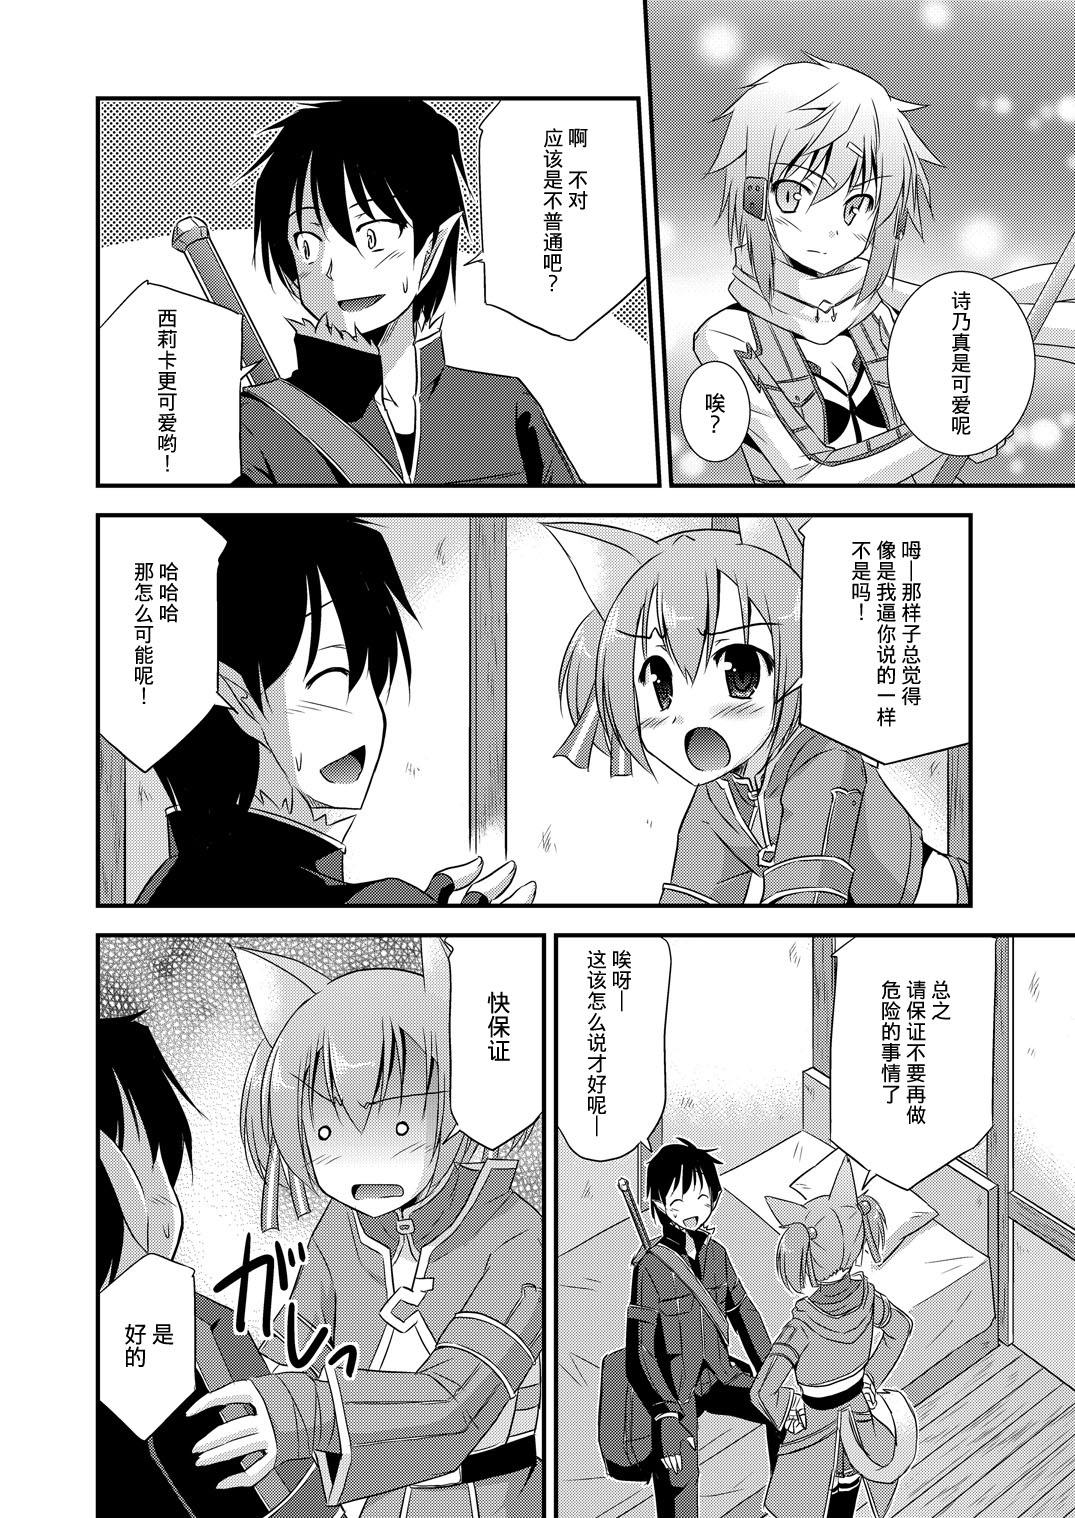 Fist Silica Route Offline Phantom Parade After - Sword art online Gay Medical - Page 5